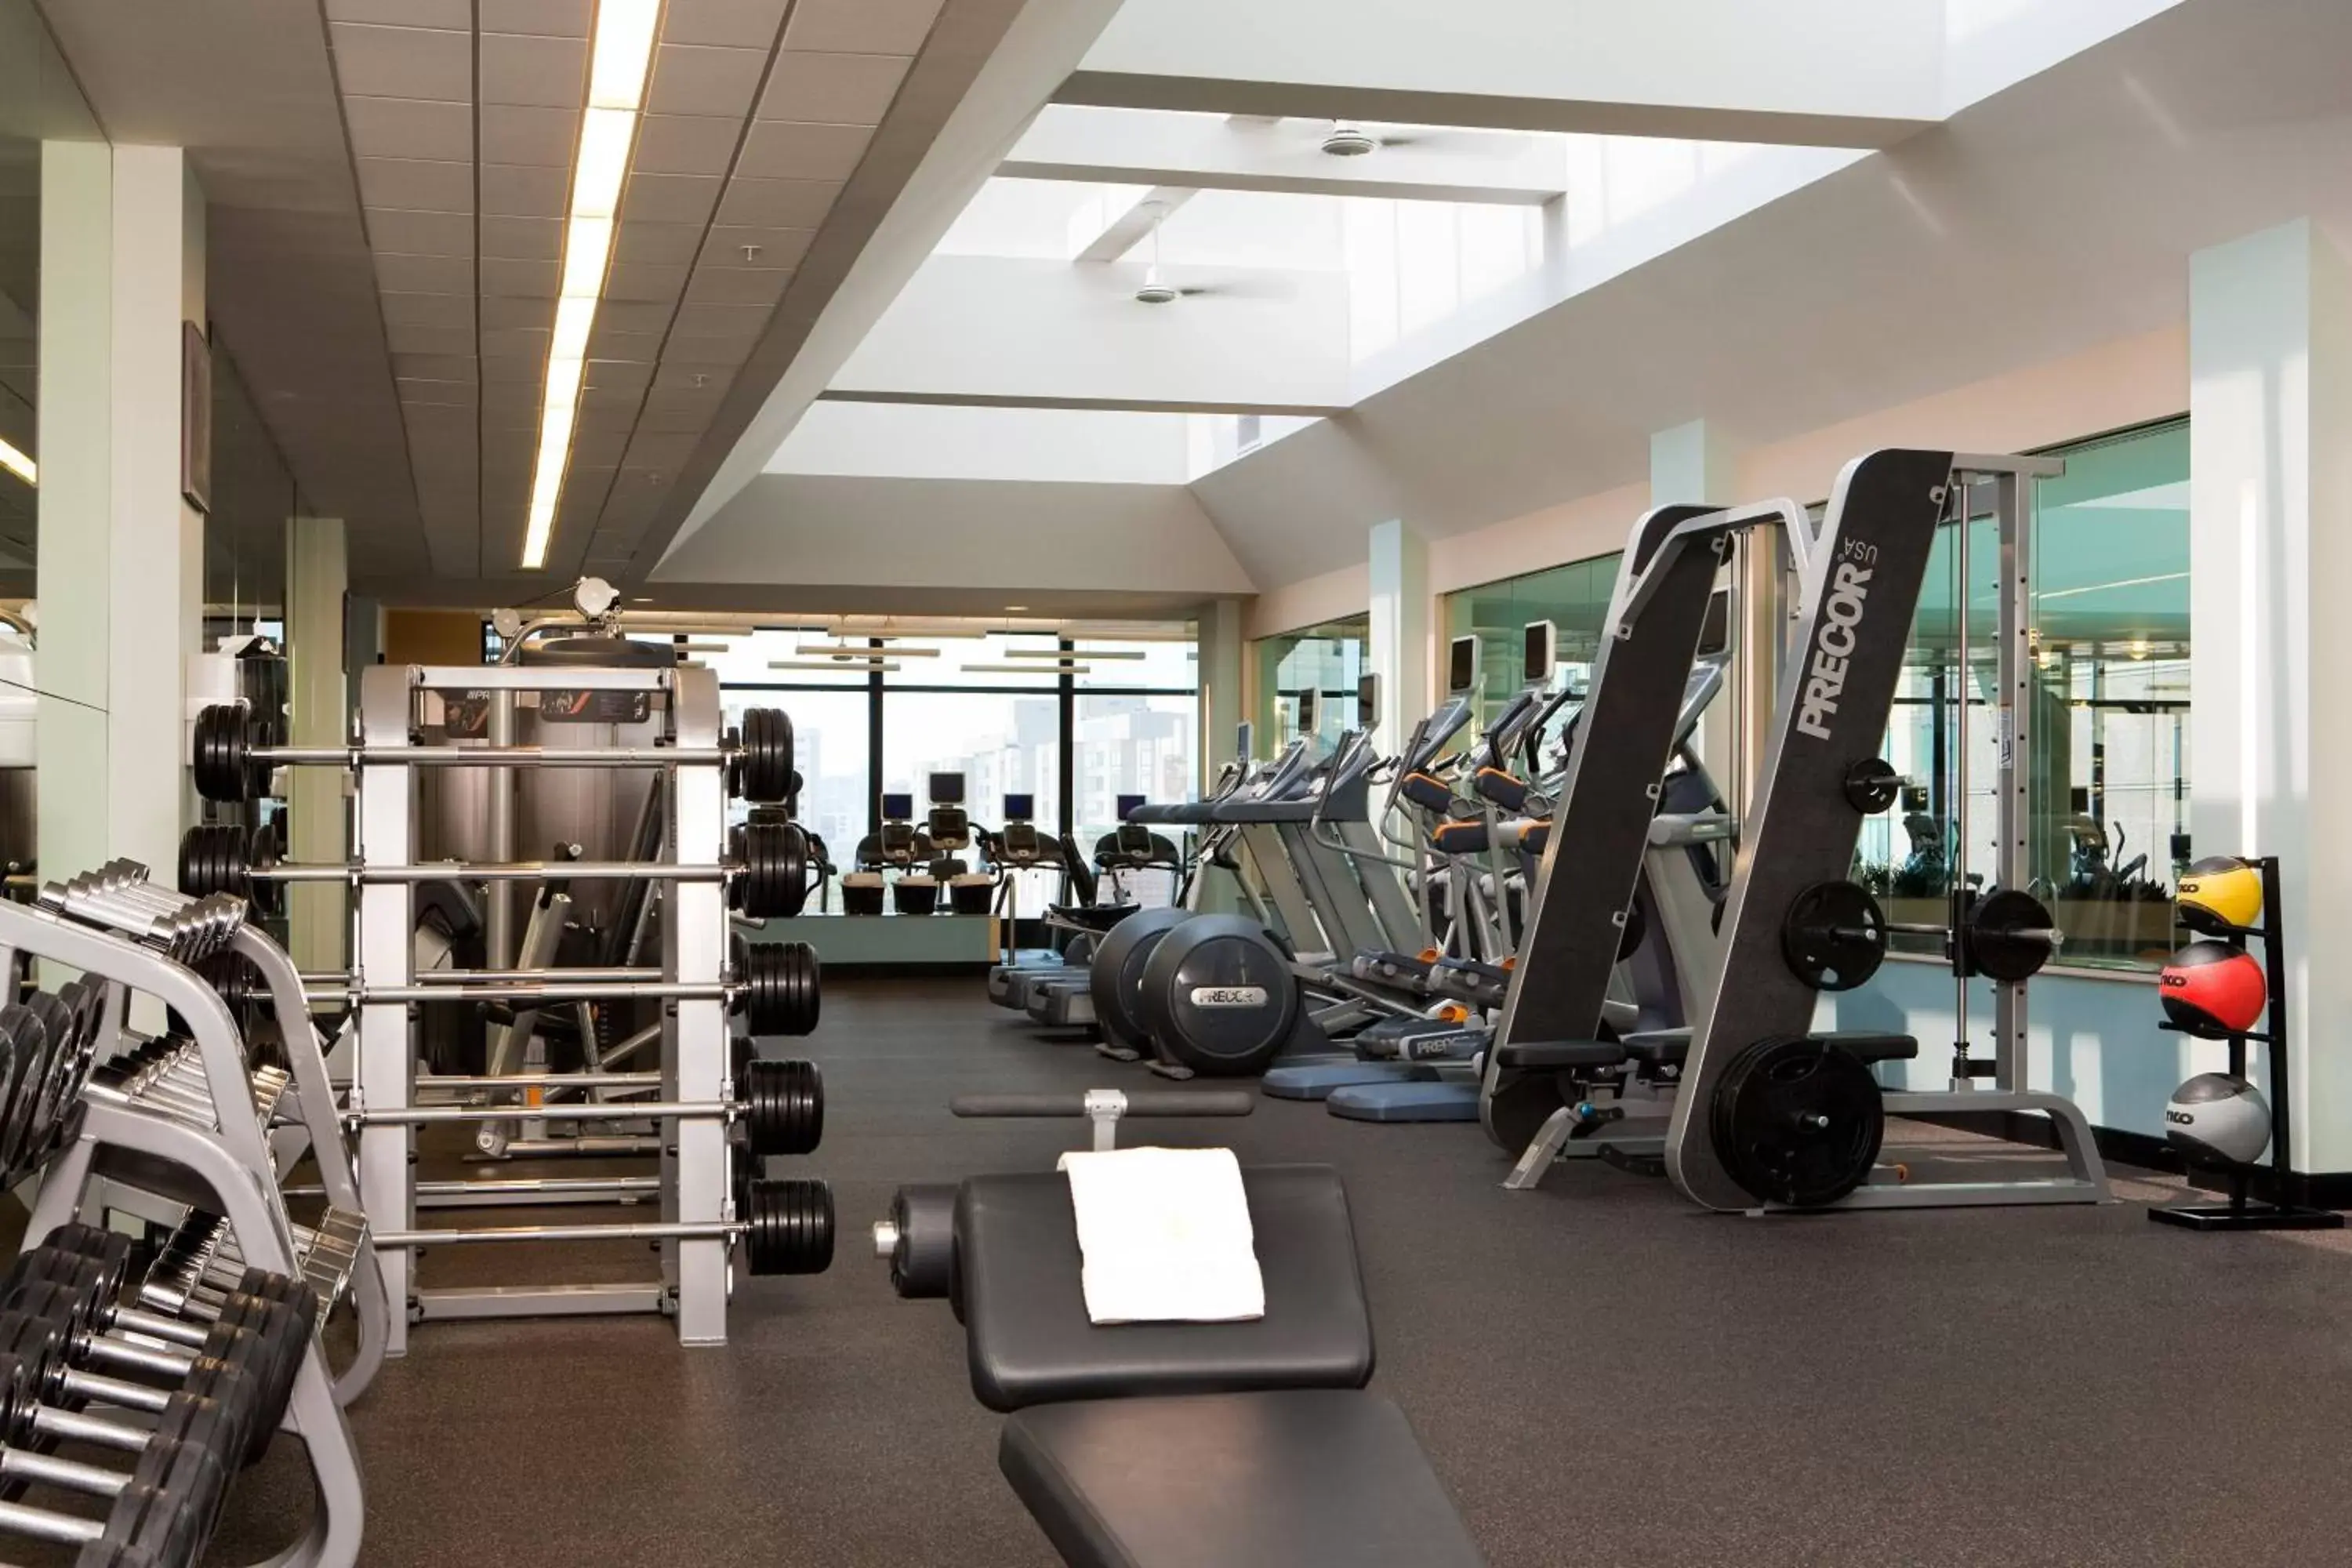 Fitness centre/facilities, Fitness Center/Facilities in Boston Marriott Copley Place